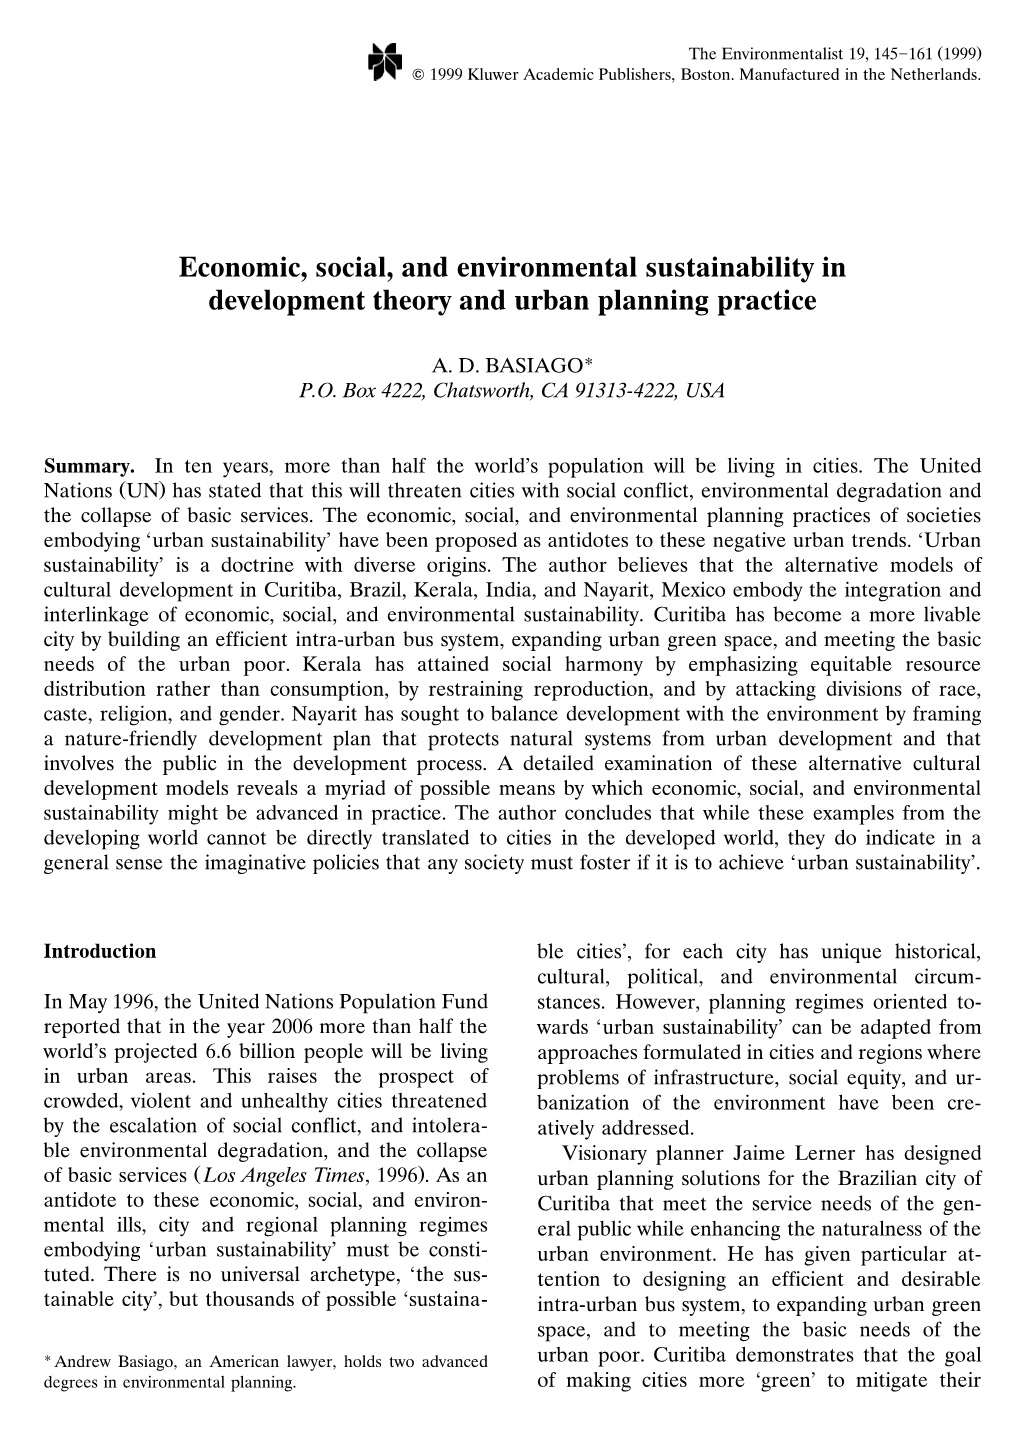 Economic, Social, and Environmental Sustainability in Development Theory and Urban Planning Practice